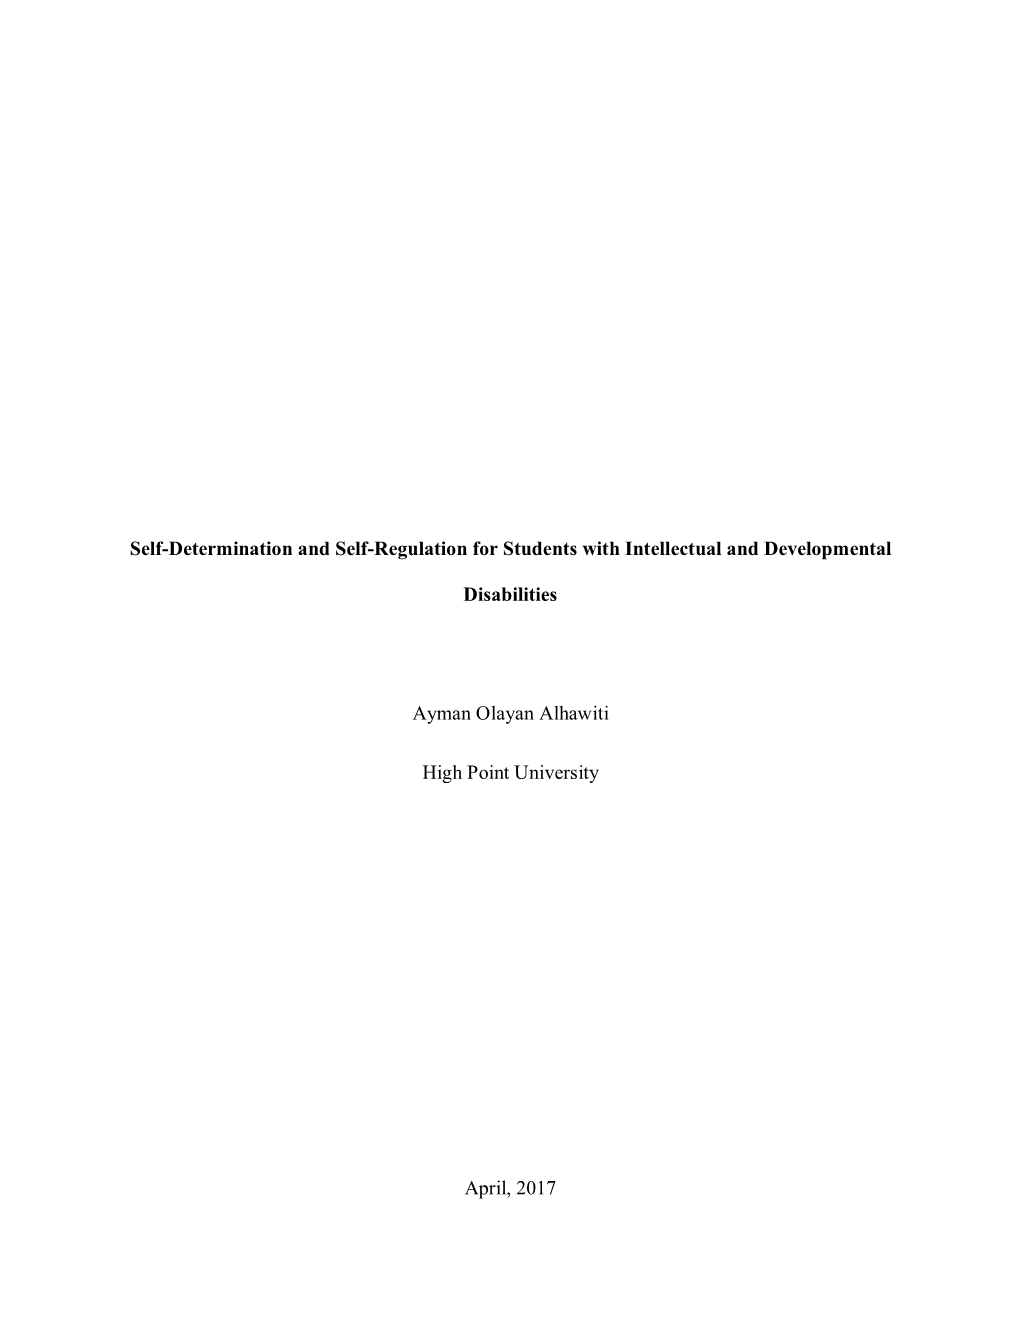 Self-Determination and Self-Regulation for Students with Intellectual and Developmental